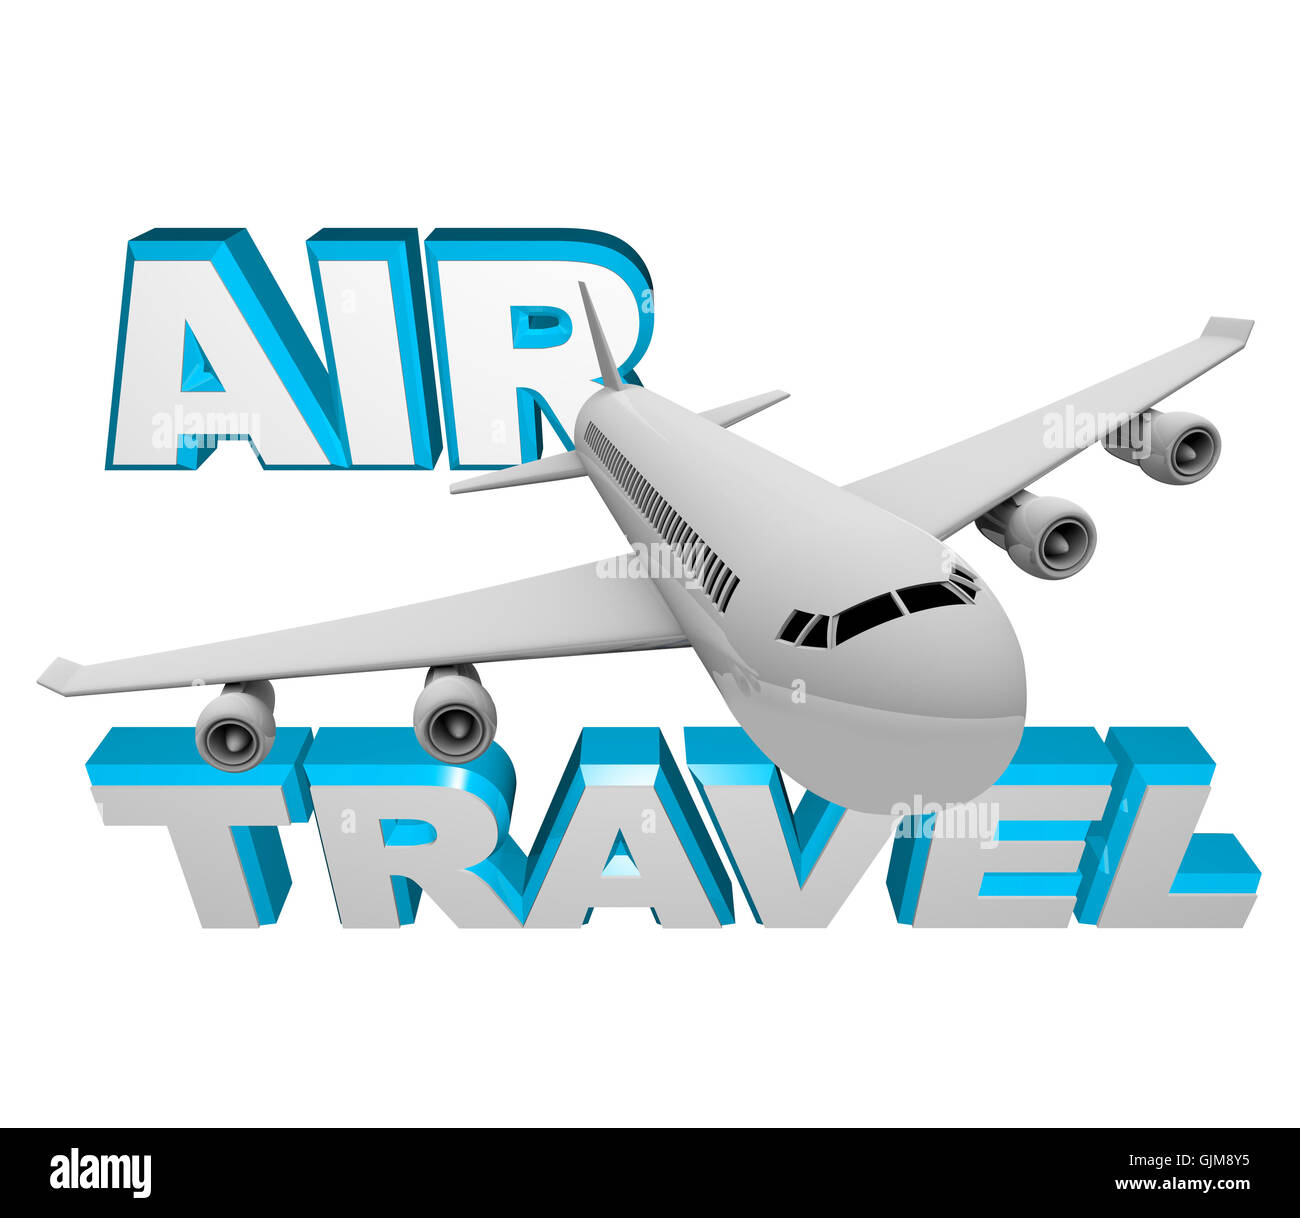 Air Travel - Airplane Flight for Vacation or Business Stock Photo